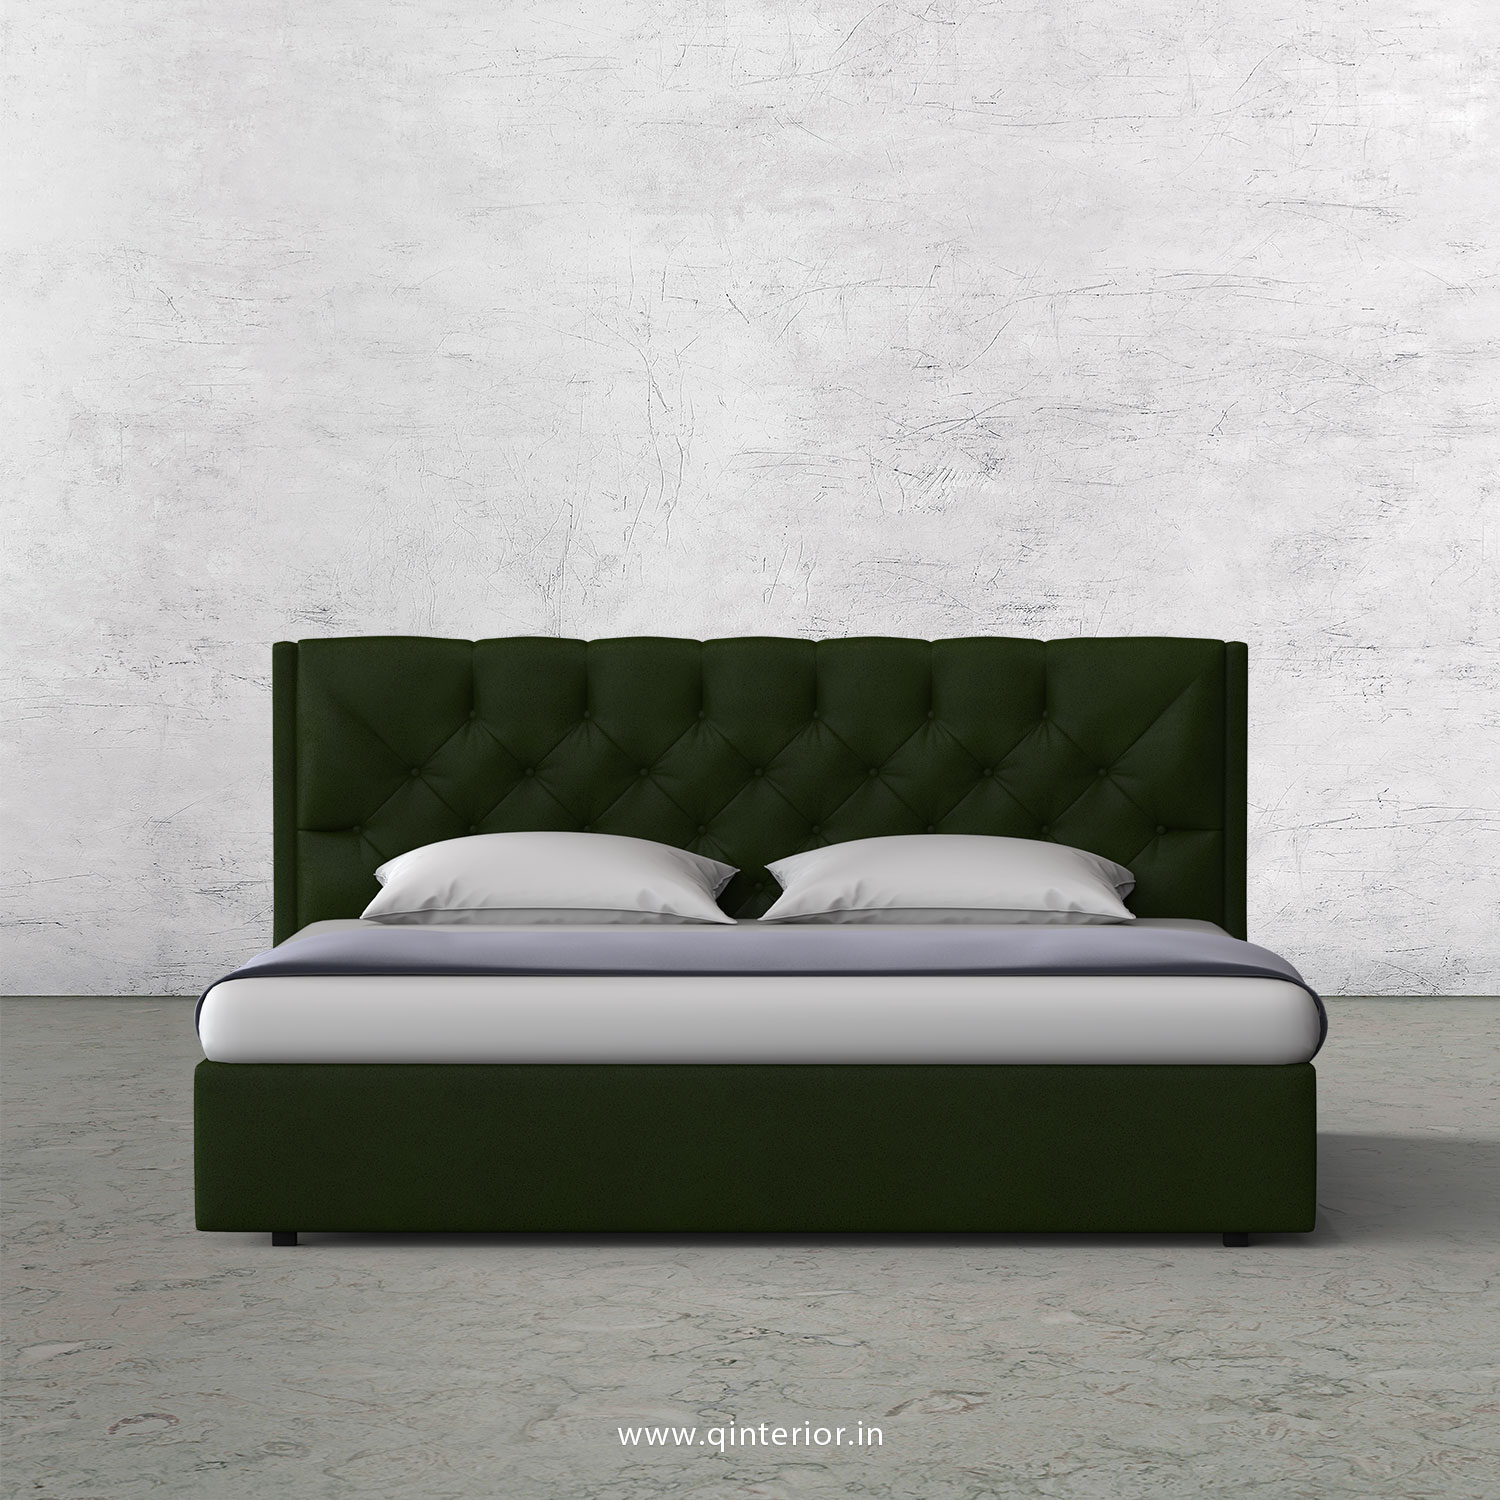 Scorpius King Size Bed in Fab Leather Fabric - KBD009 FL04